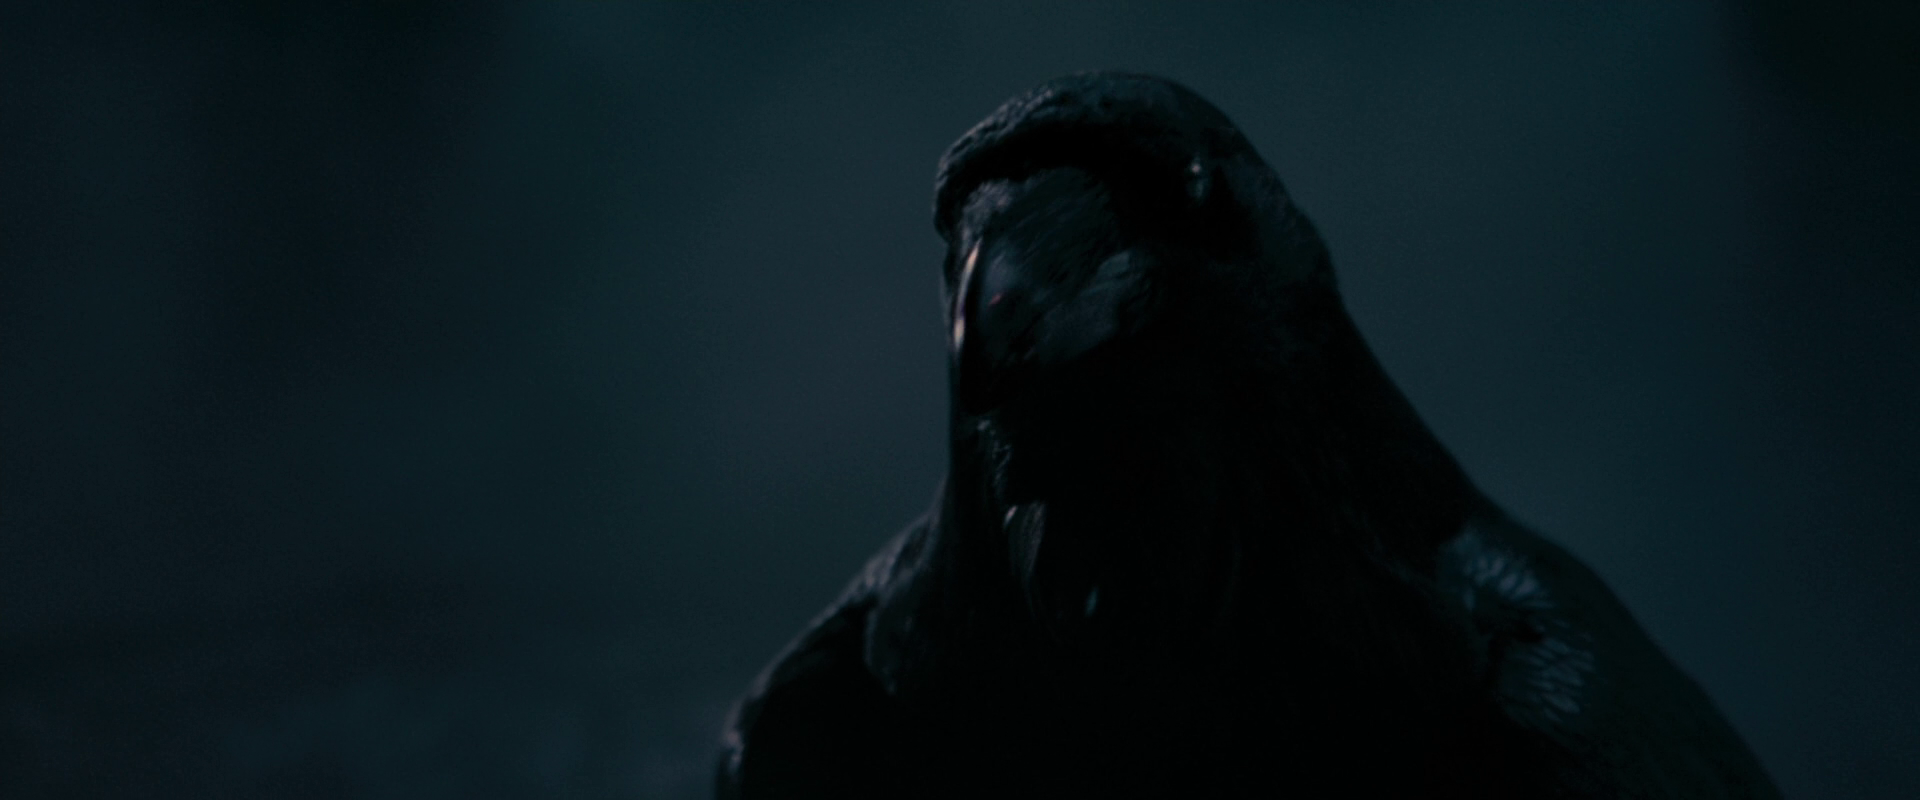 ѻ/:ѻ The.Raven.2012.1080p.BluRay.x264.DTS-FGT 10.46GB-2.png